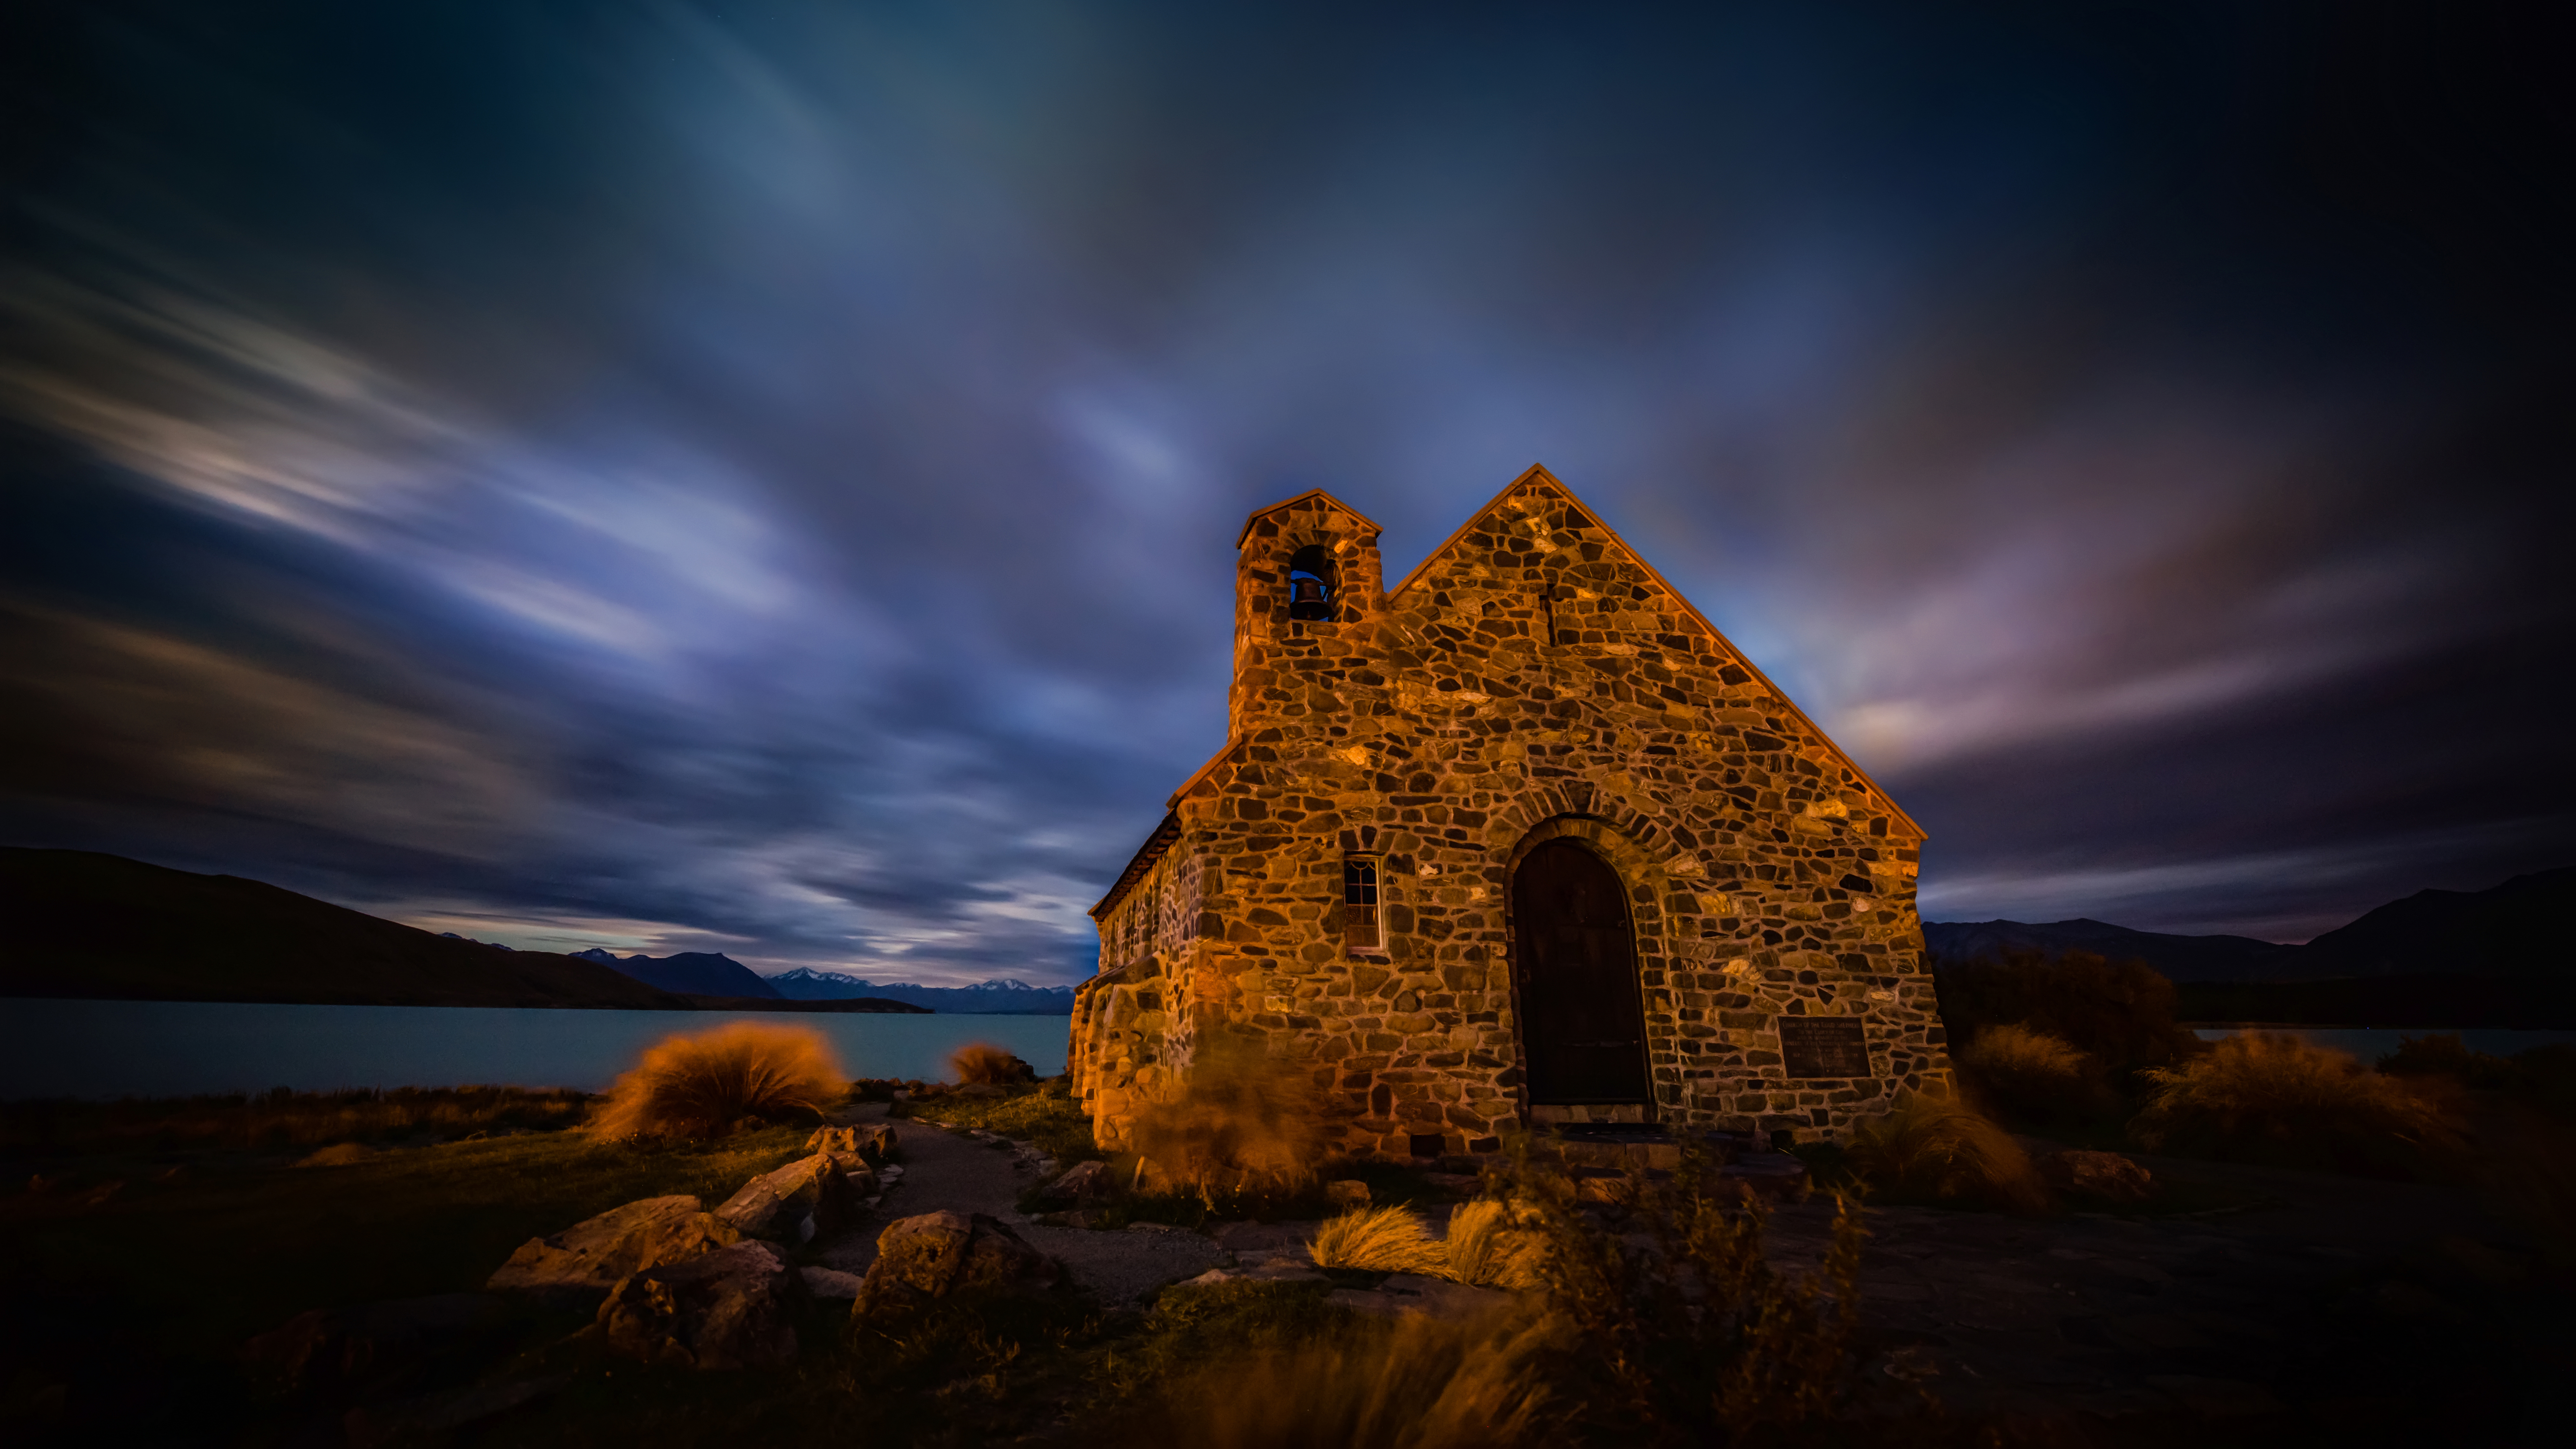 General 7680x4320 photography Trey Ratcliff New Zealand old building night river mountains Mount Cook church building